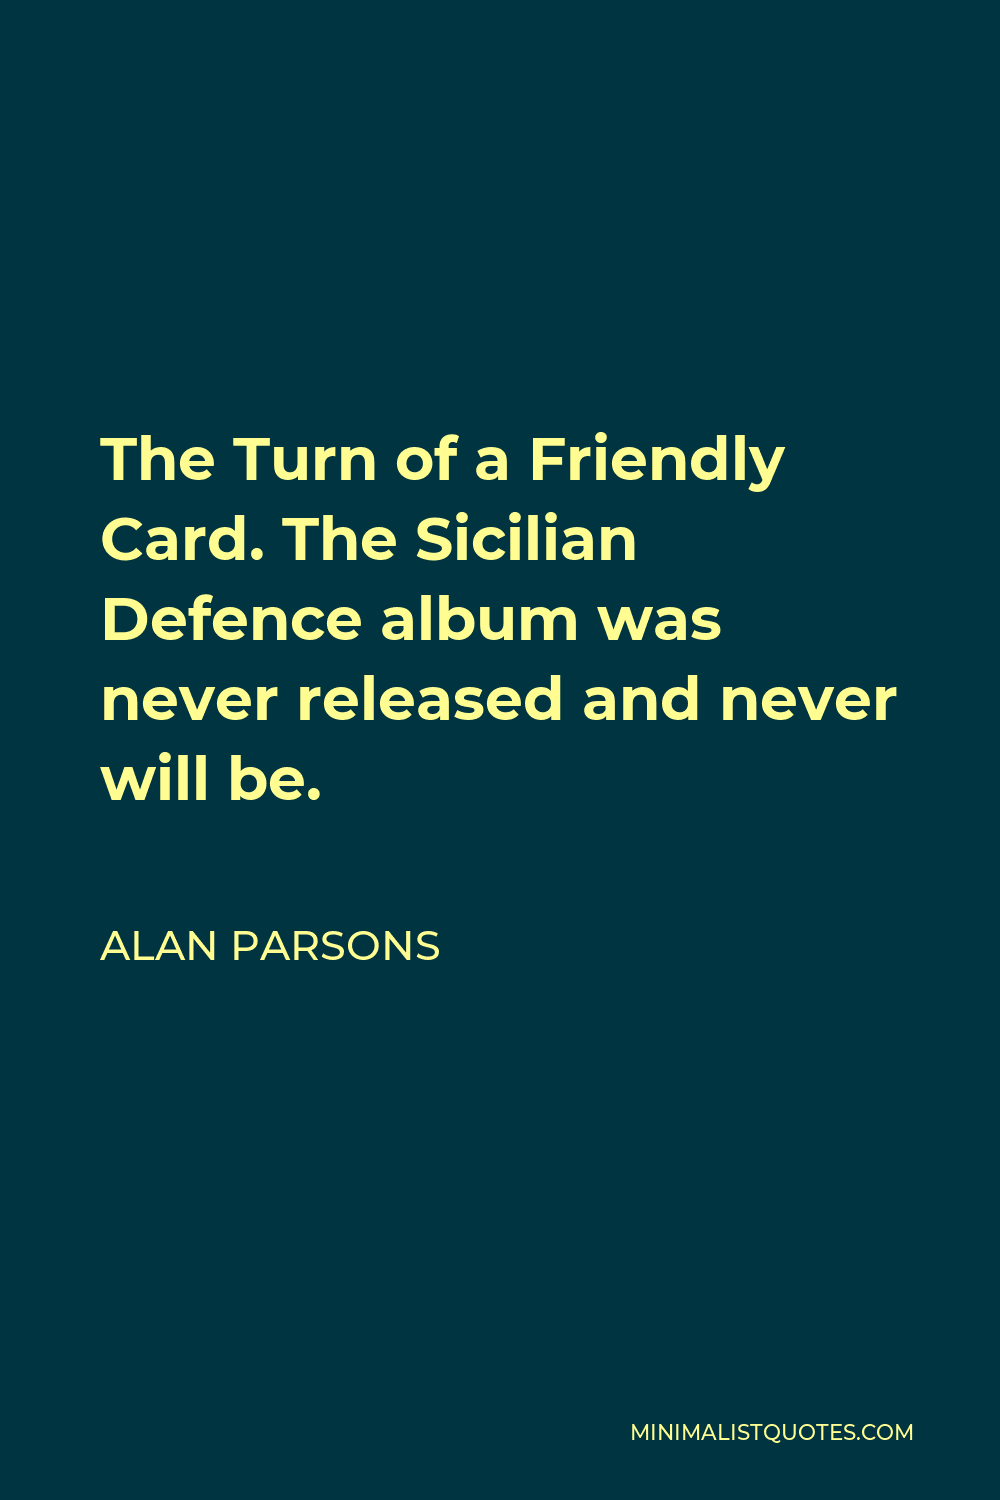 Alan Parsons Quote - The Turn of a Friendly Card. The Sicilian Defence album was never released and never will be.